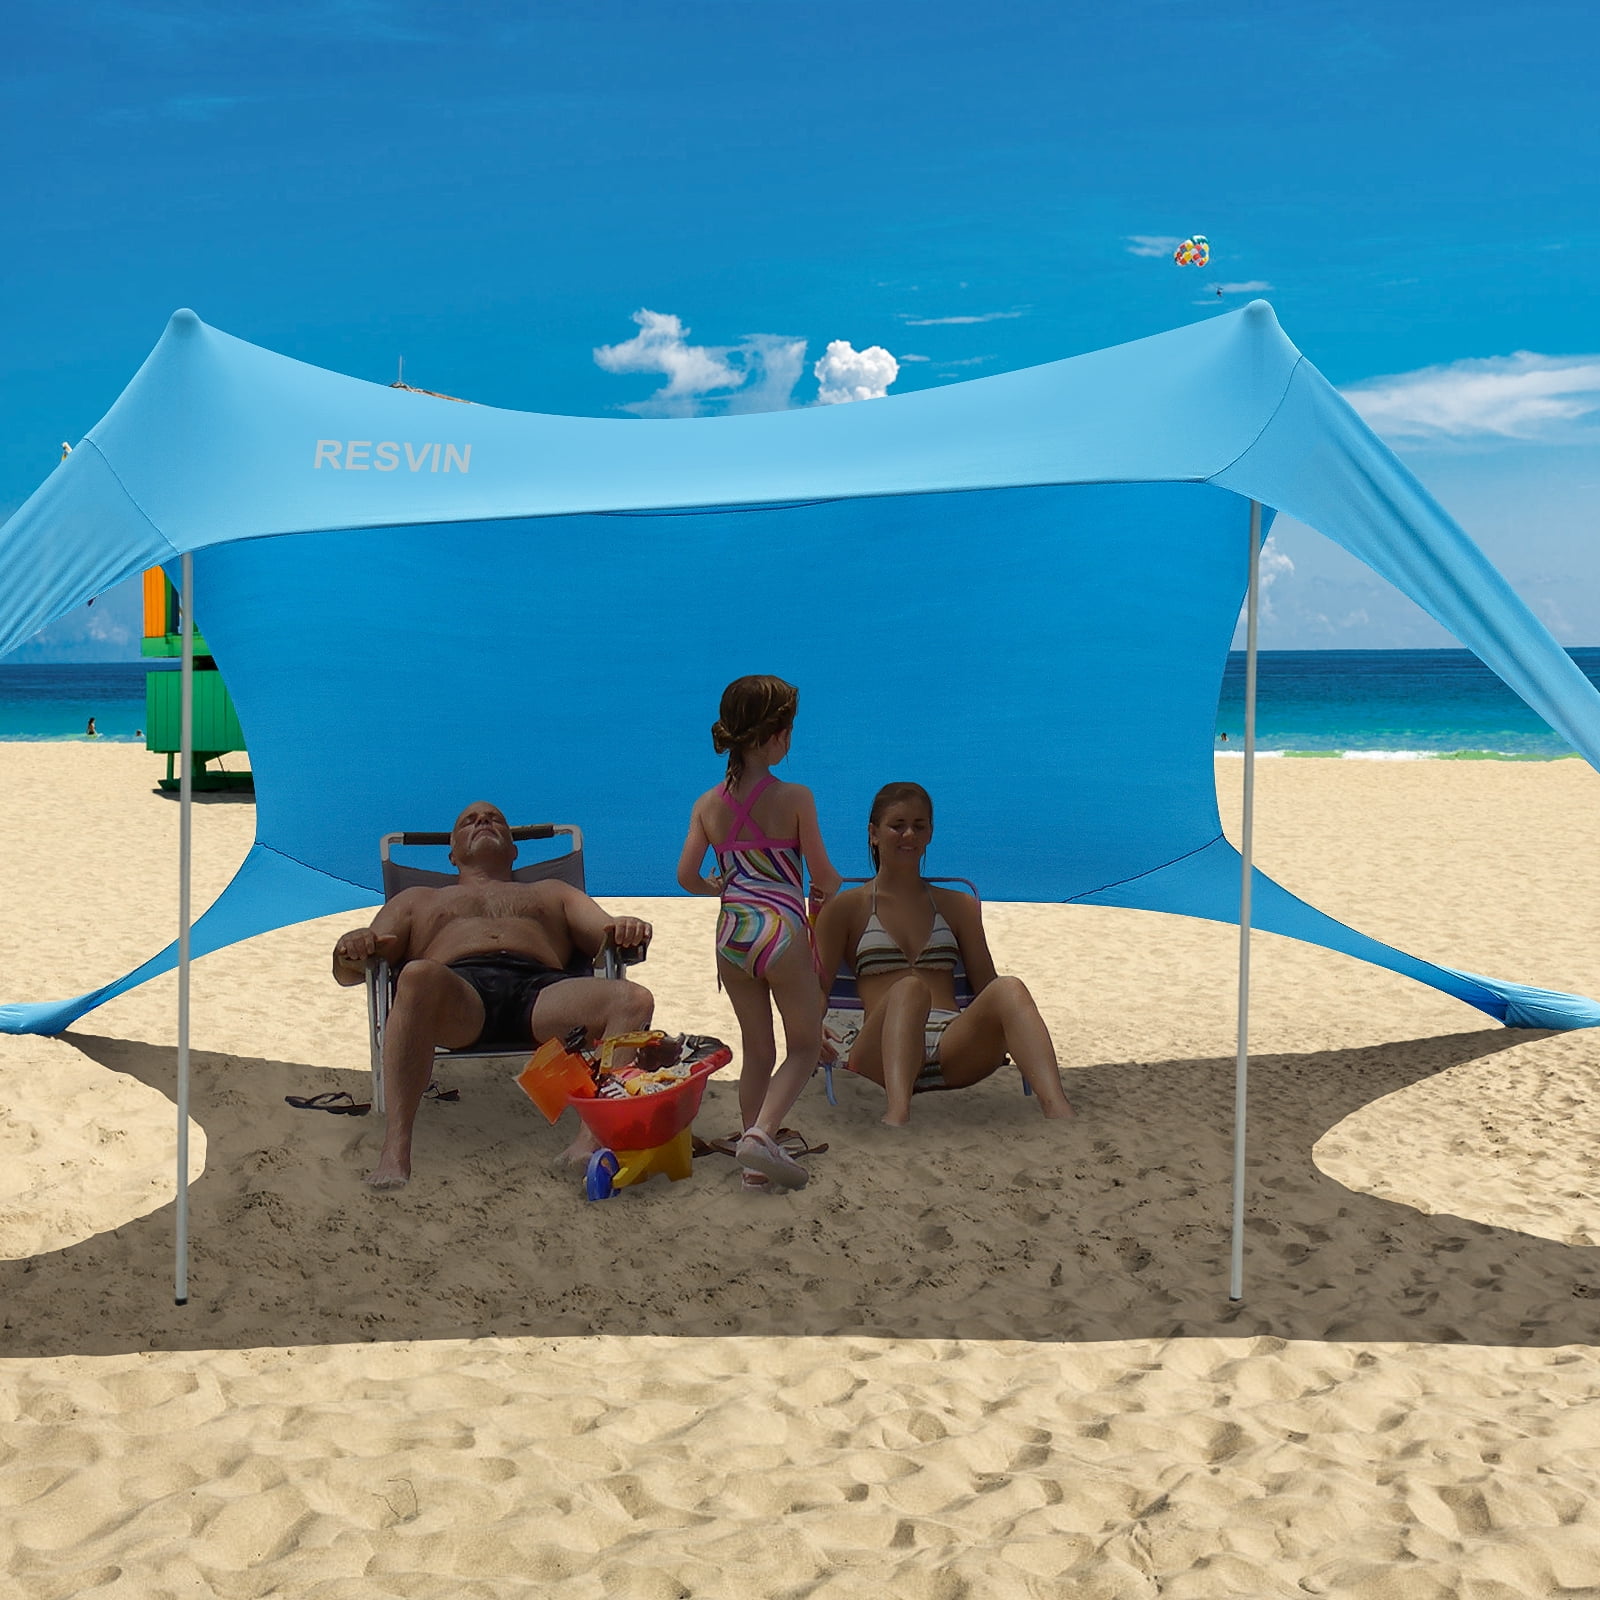 Pop Up Beach Tent UPF50+ Outdoor Sun Shade Canopy for 4-6 Adults, 1010 ft  Family Large Portable Sunshade, Tent with 4 Aluminum Poles,4 Pole Anchors,4  Sandbag Anchors for Beach Camping Outdoor 